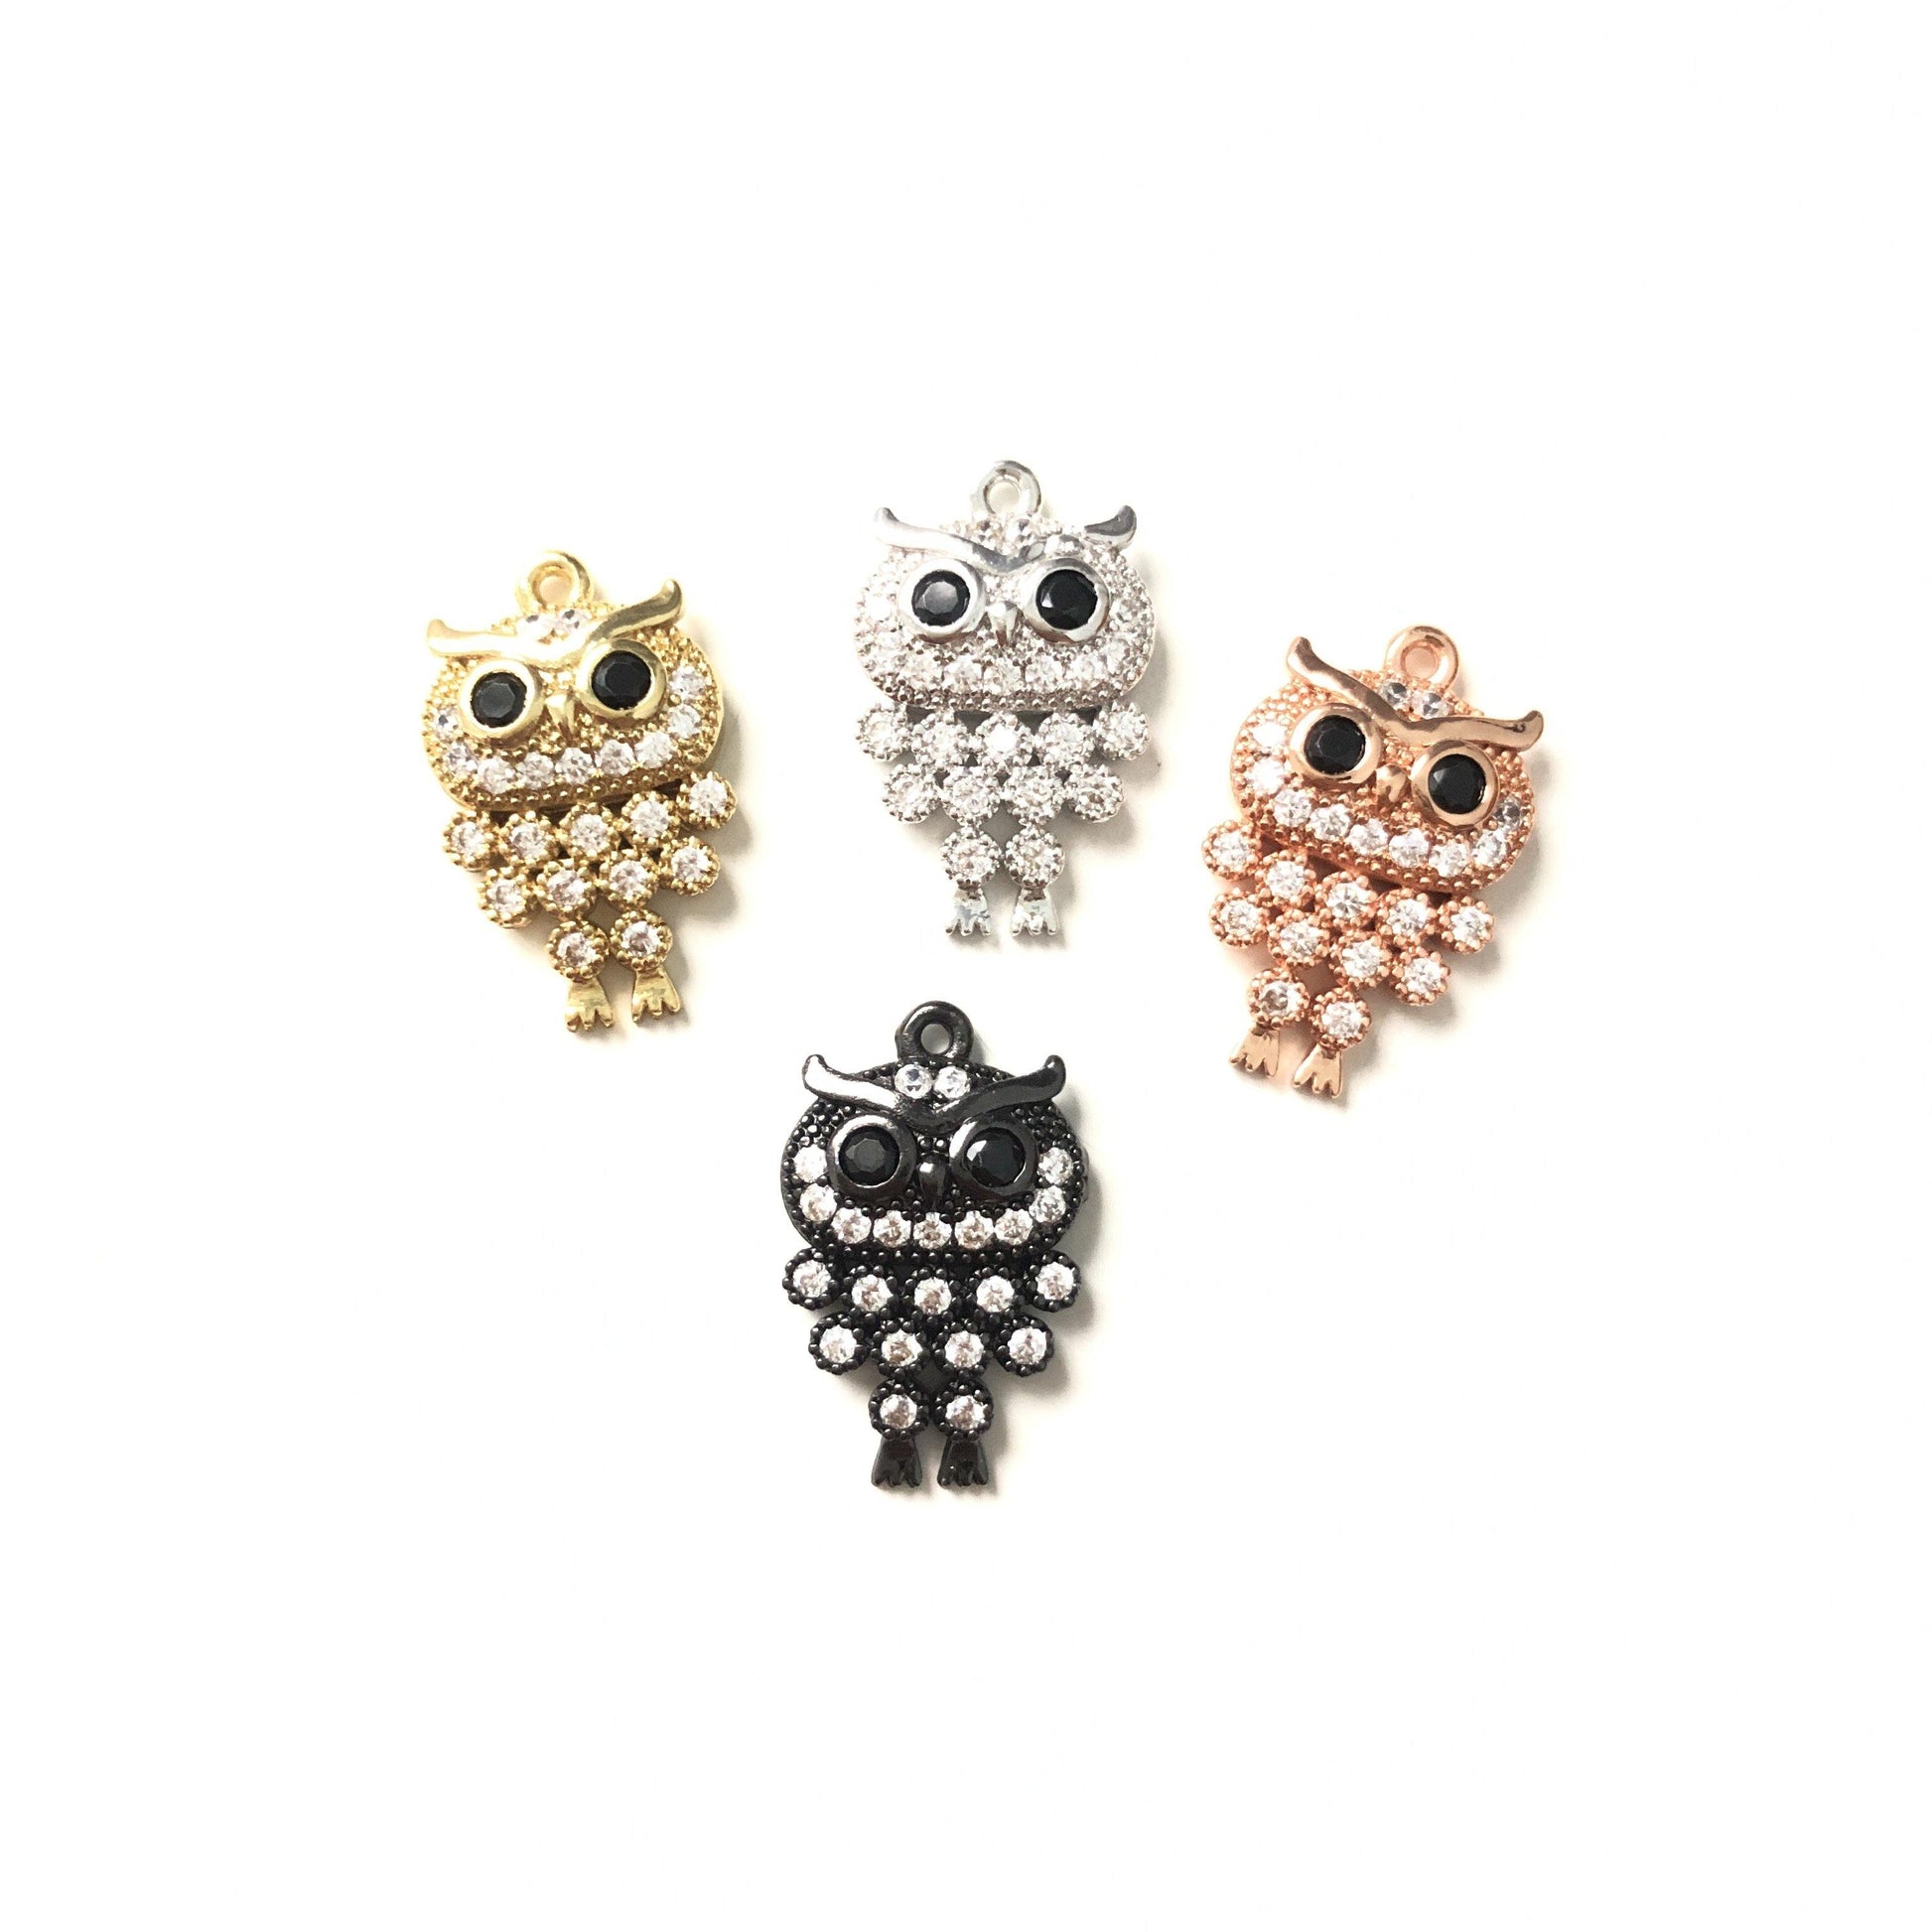 10pcs/lot 19*12mm CZ Paved Owl Charms CZ Paved Charms Animals & Insects Charms Beads Beyond